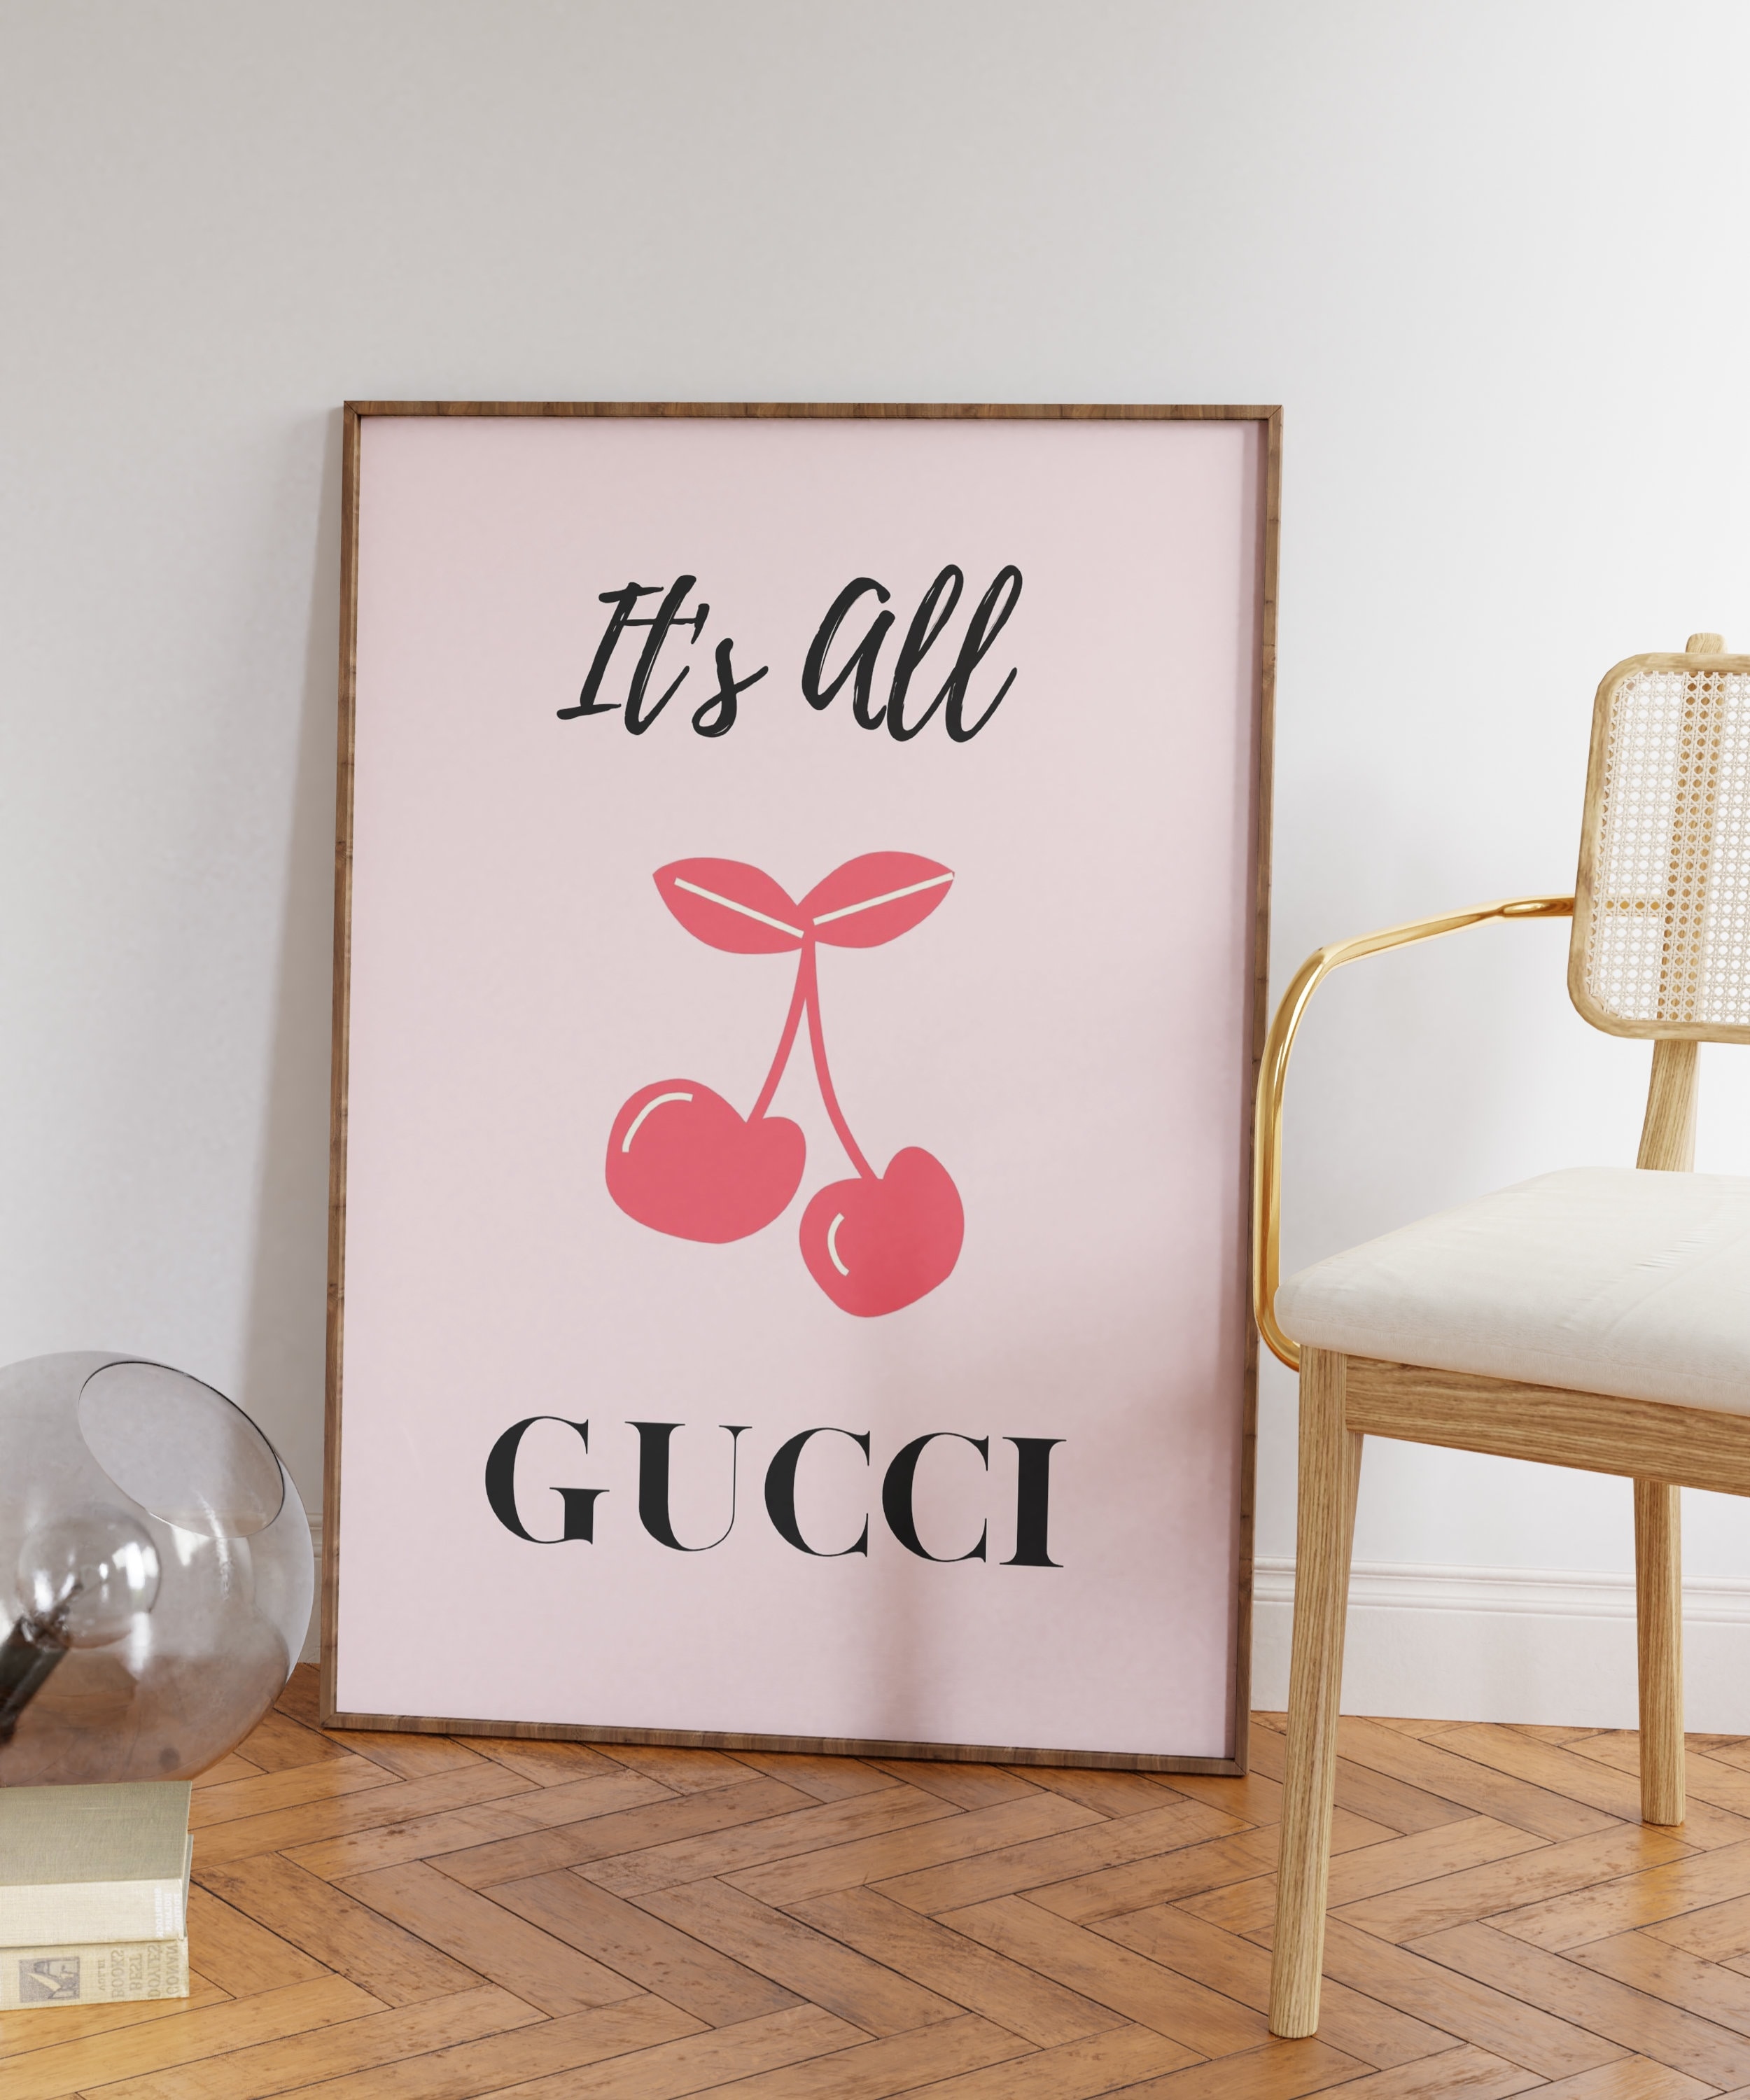 Gucci Store Front Framed Print